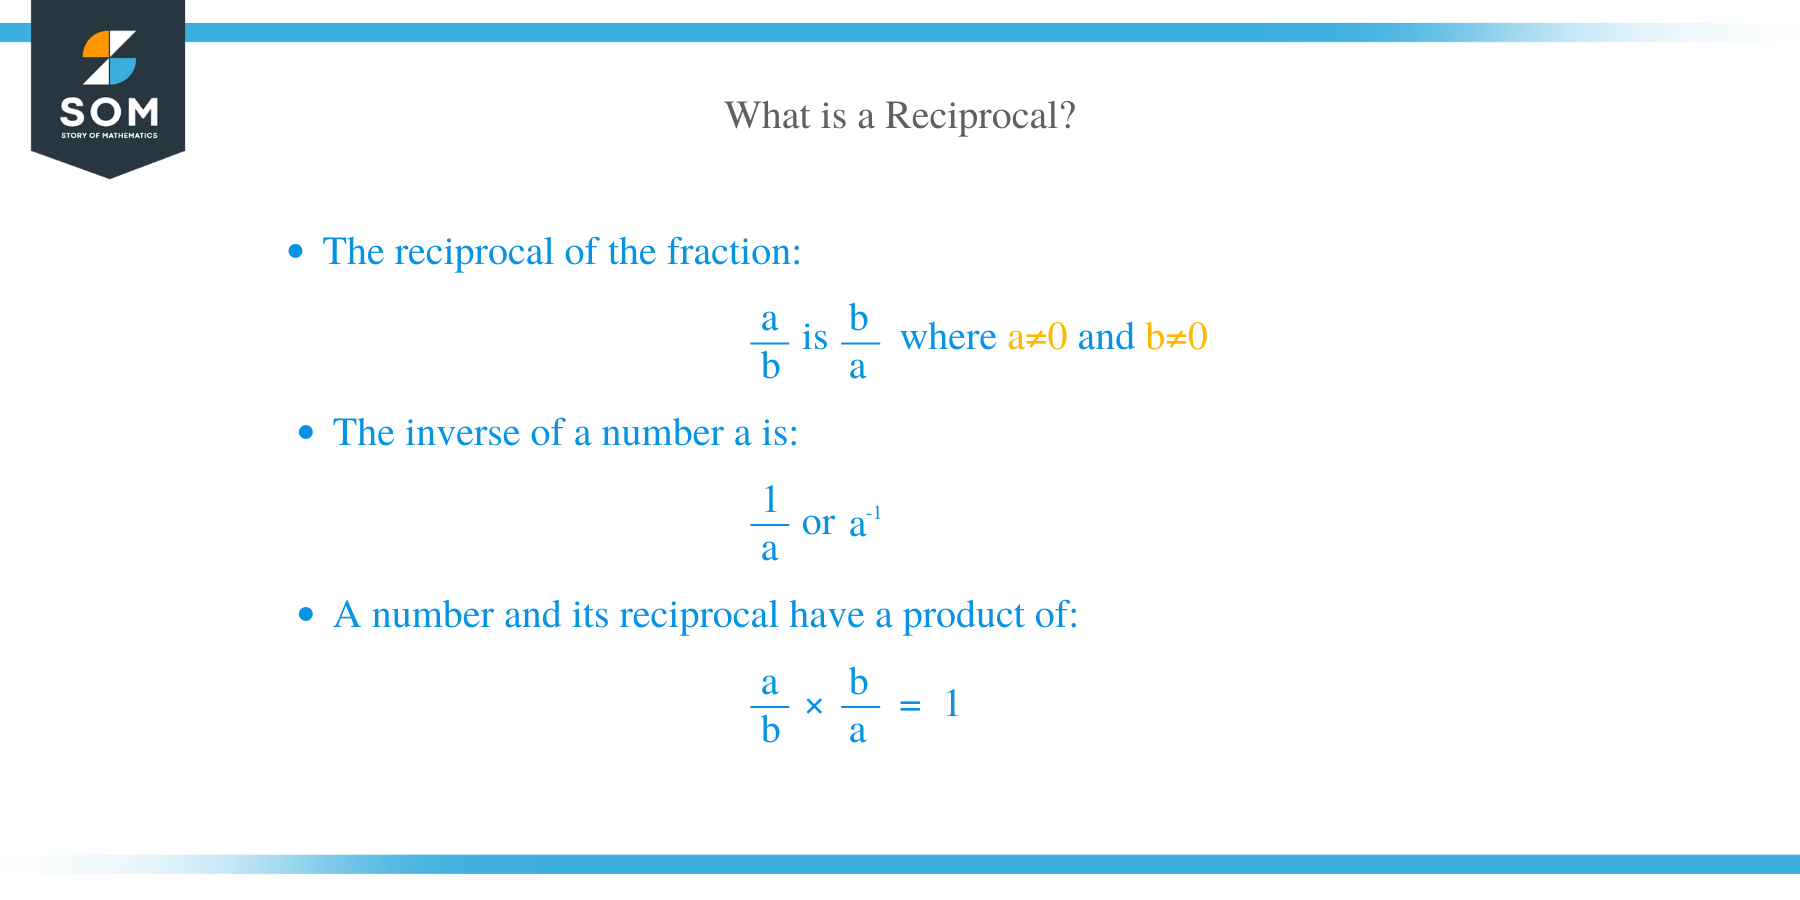 What is a Reciprocal?